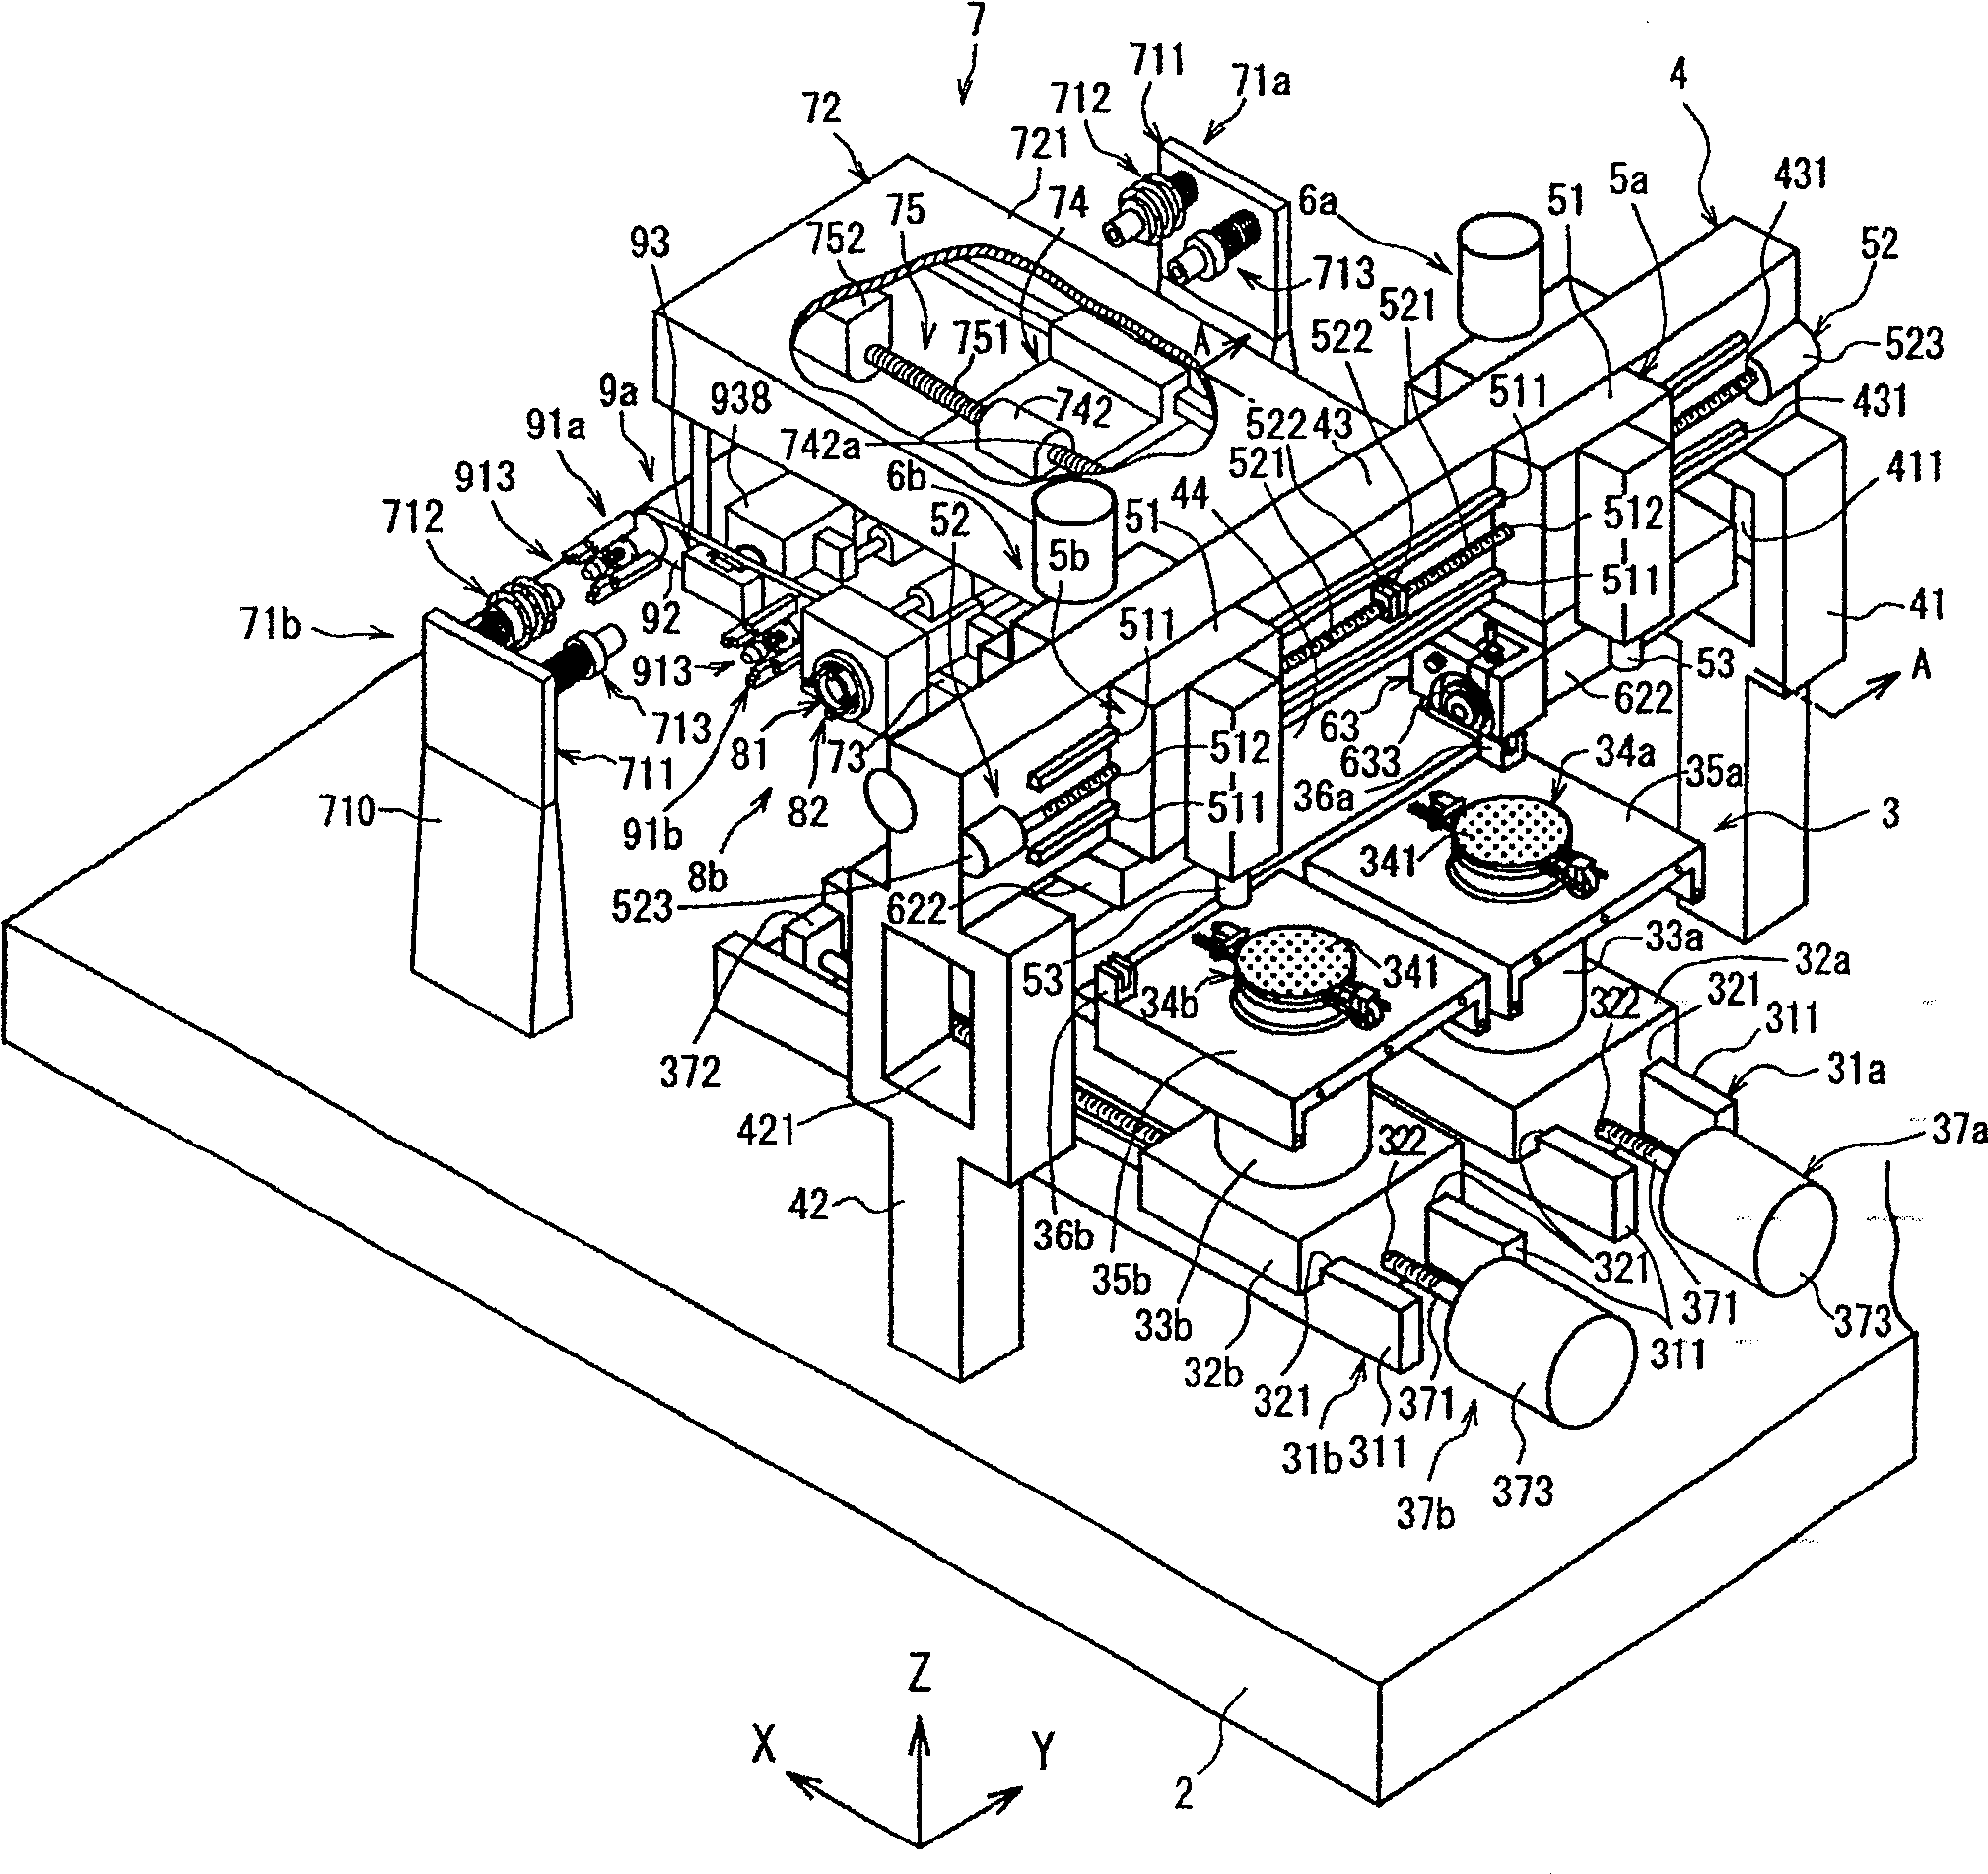 Apparatus for exchanging a cutting blade